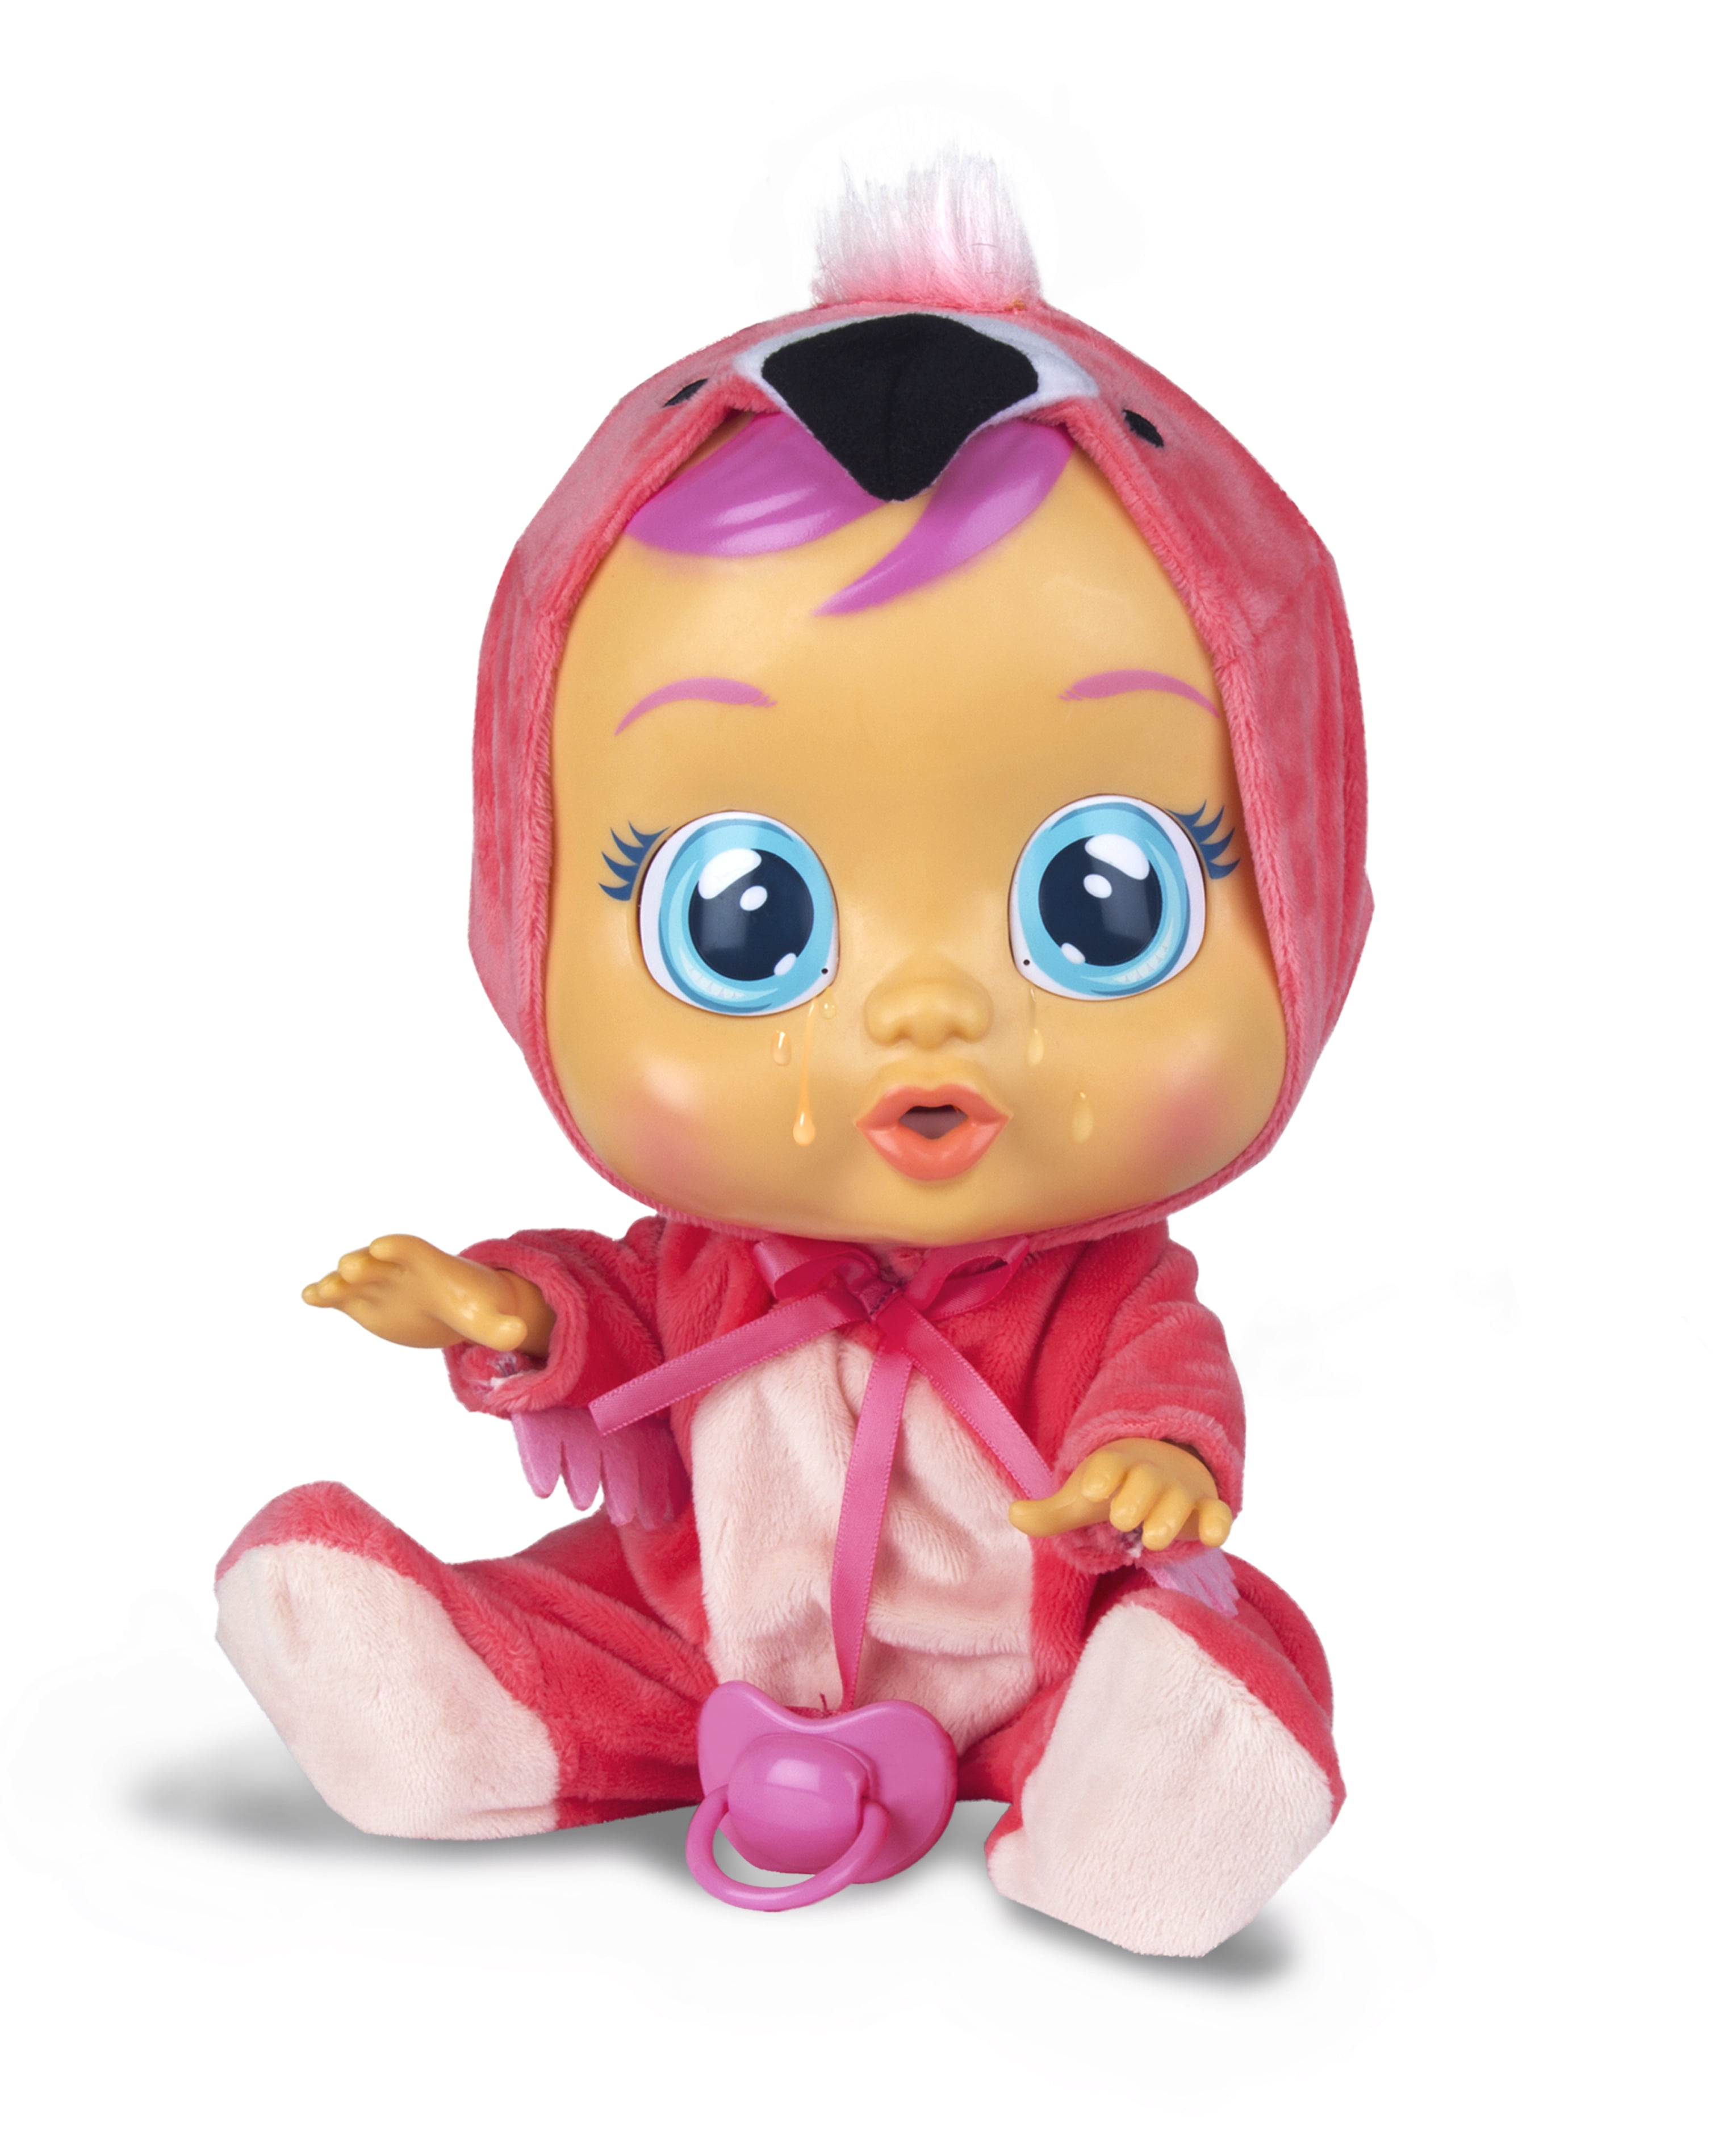 Crying Baby LALA Doll 30CM Real Shedding Tears Cute Toy Gift For Child Kids 